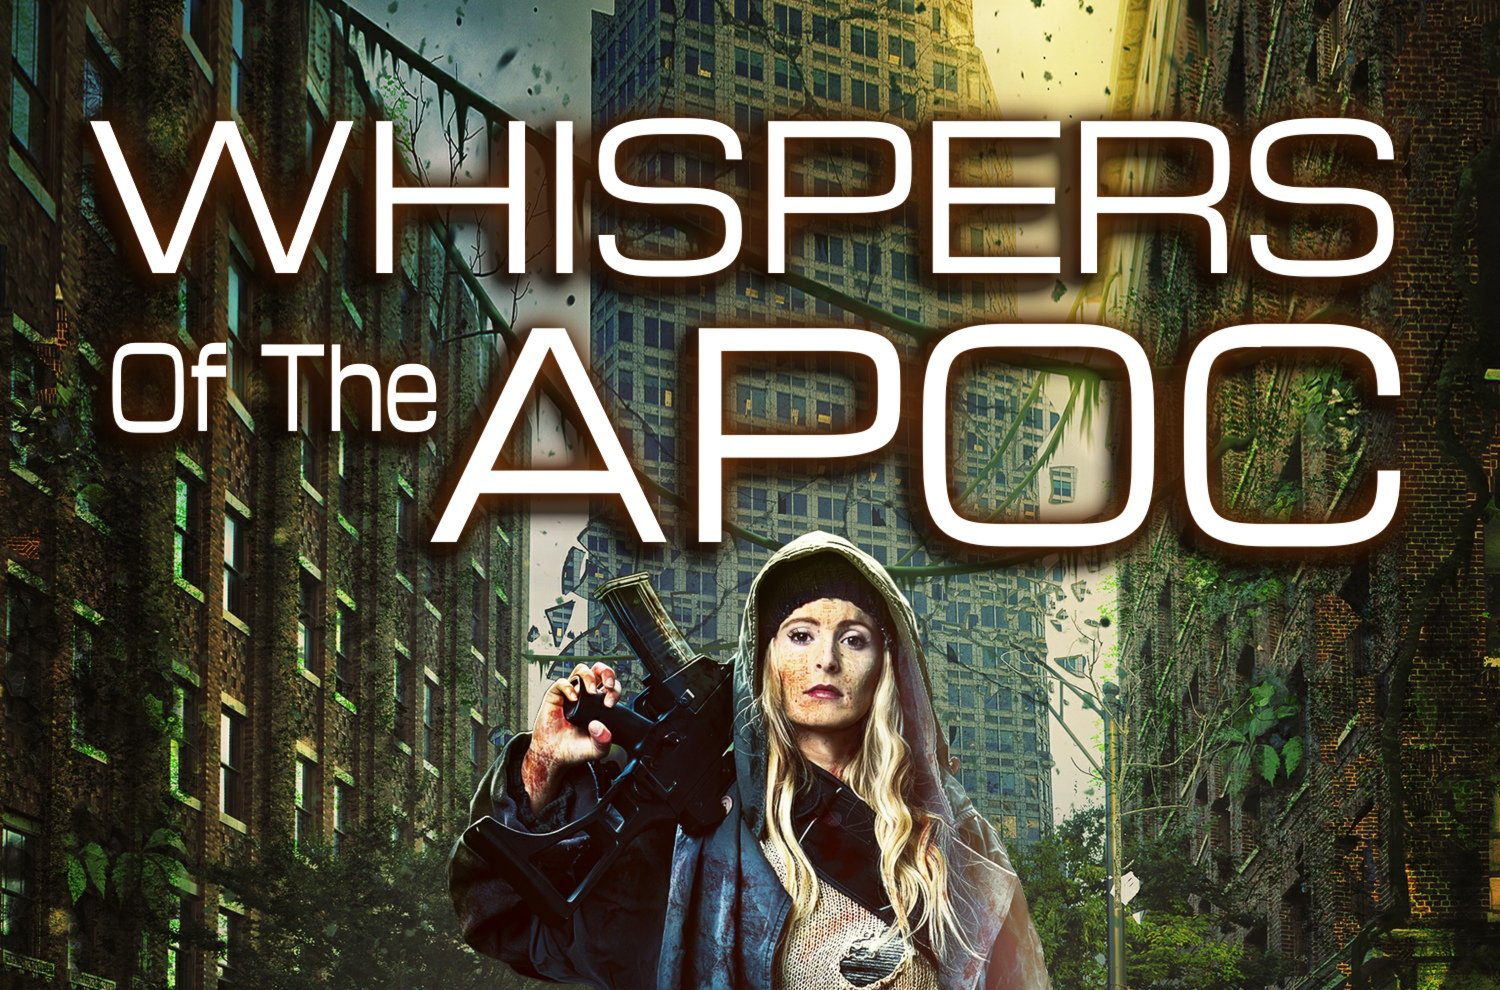 Whispers of the Apoc: Tales From the Zombie Apocalypse